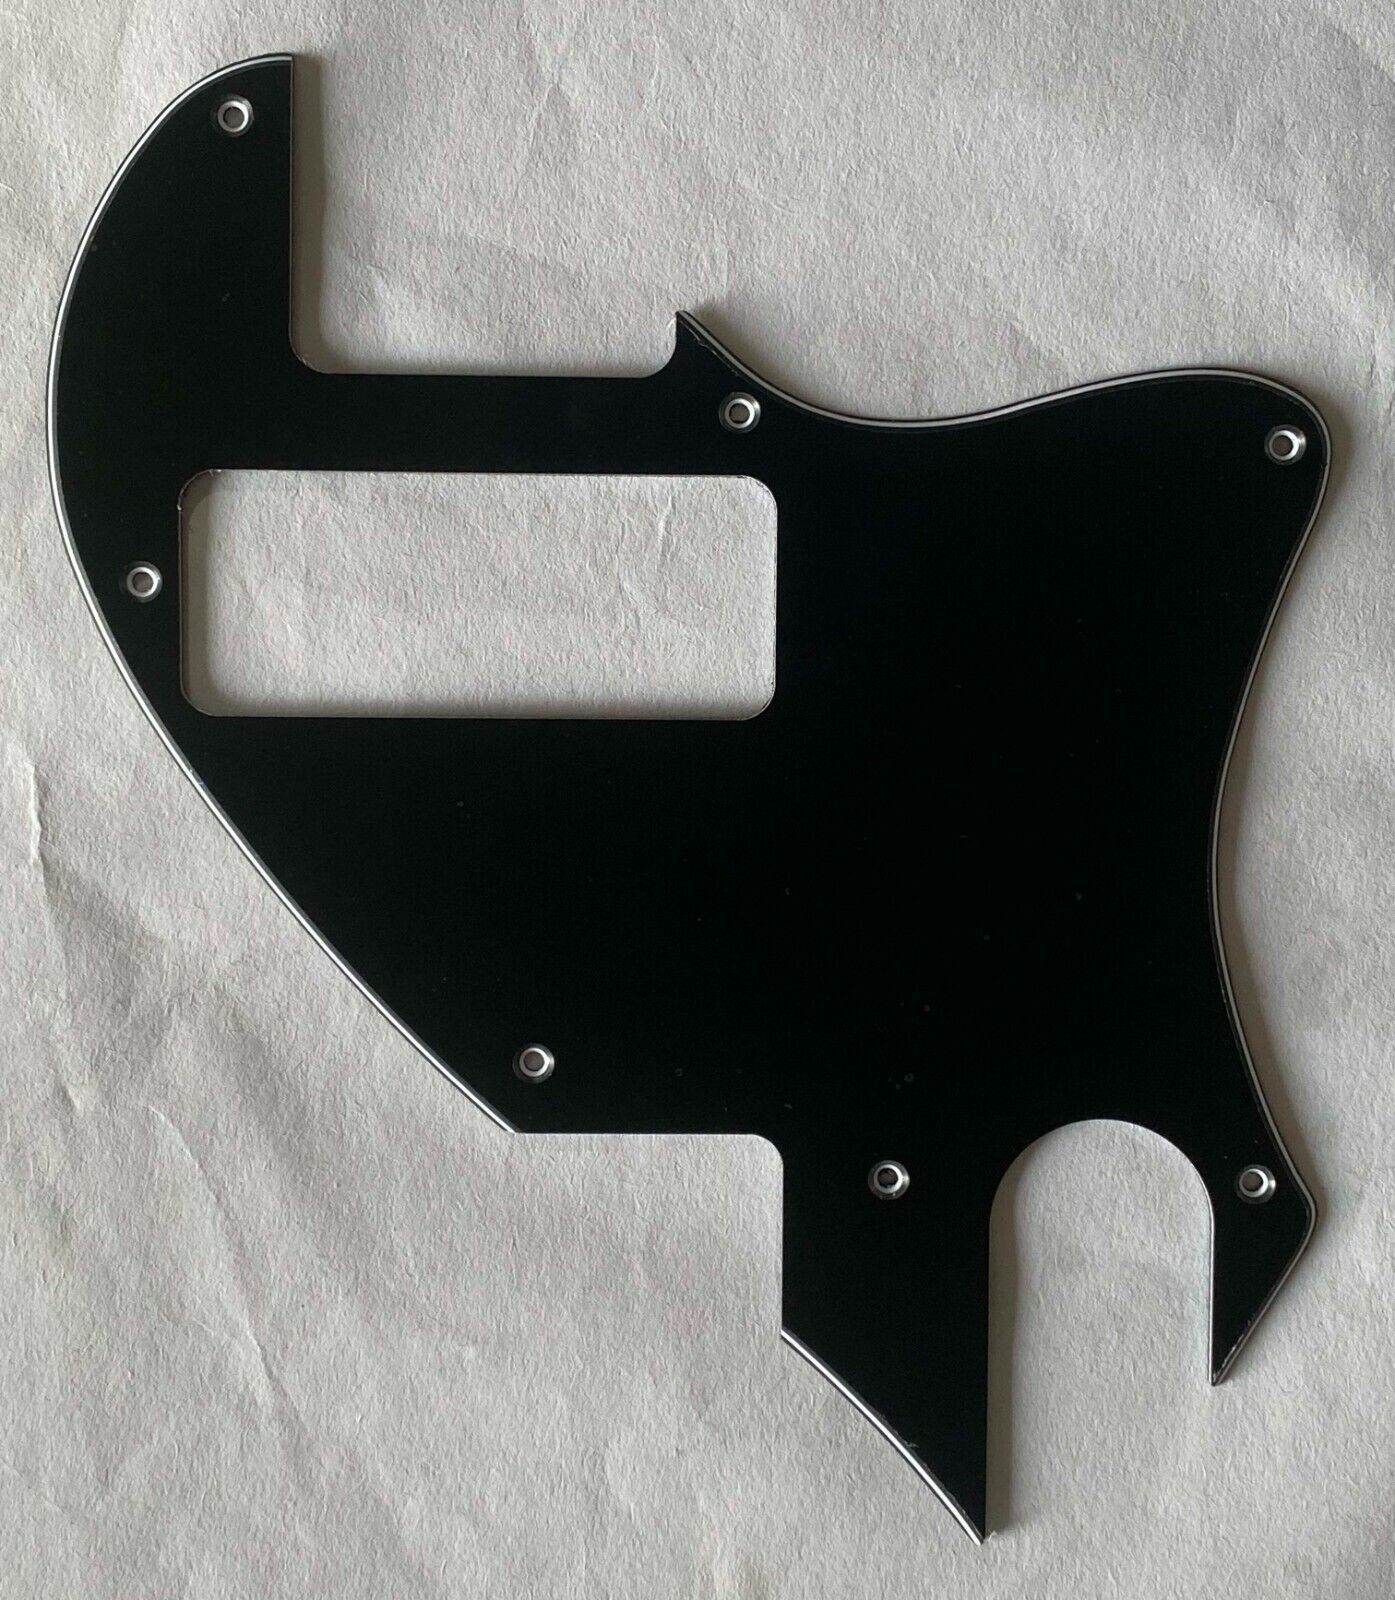 Primary image for Electric Guitar Pickguard for Telecaster F Hole Convertion P90,3 Ply Black